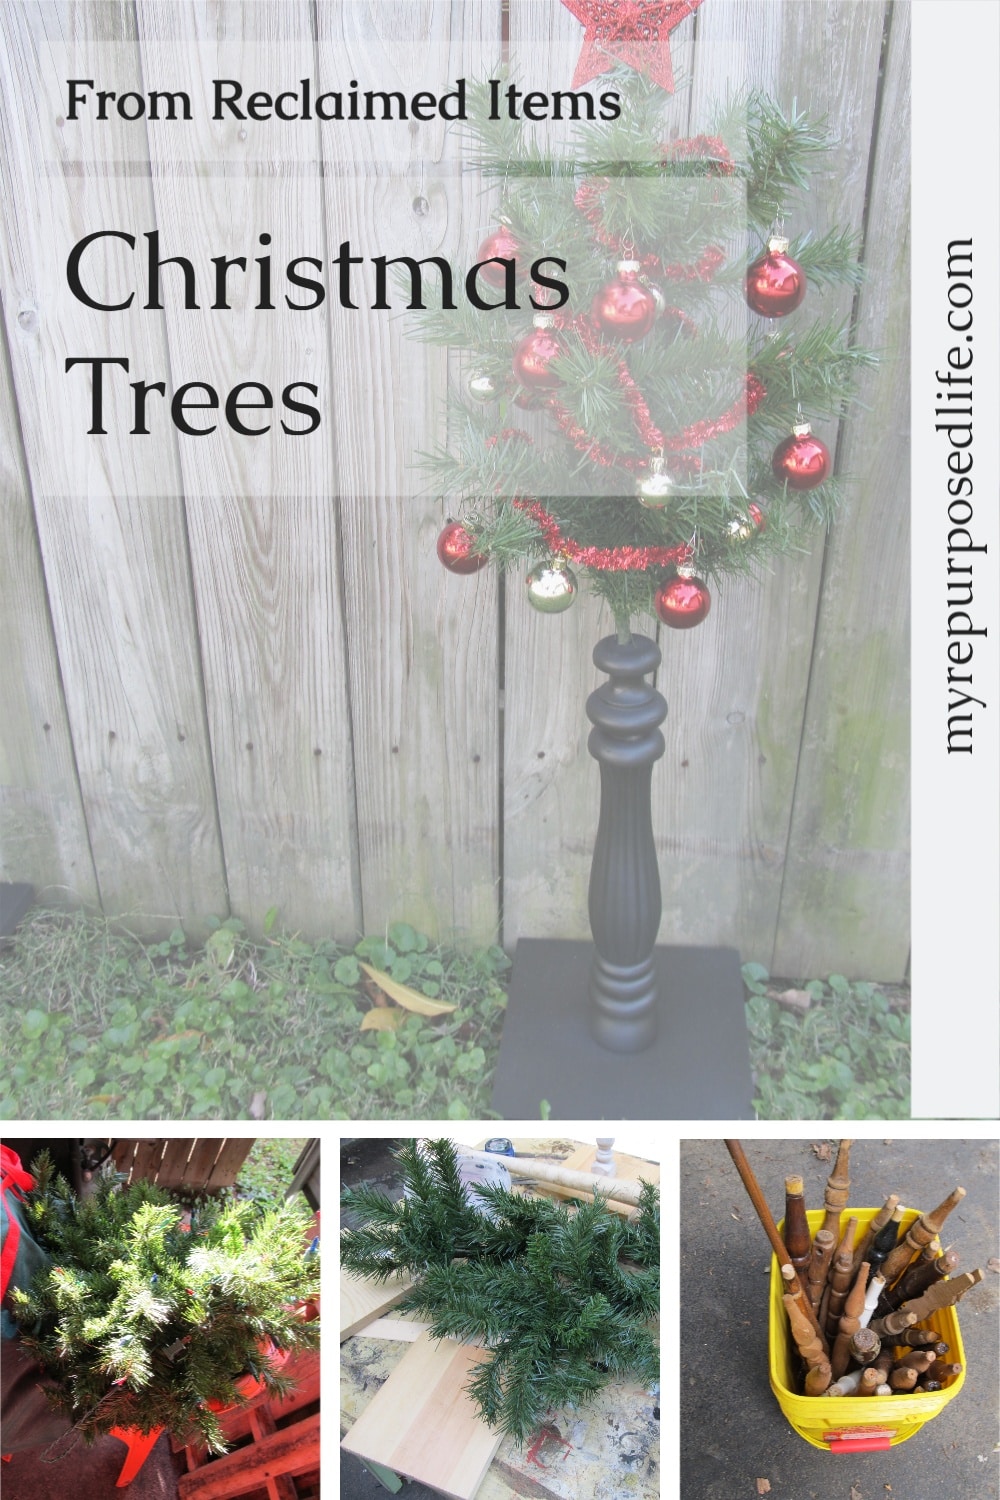 Using upcycled chair spindles and some old Christmas tree branches make a perfect little Christmas tree for small spaces such as nursing homes or hospital. #MyRepurposedLife #repurposed #Christmas via @repurposedlife